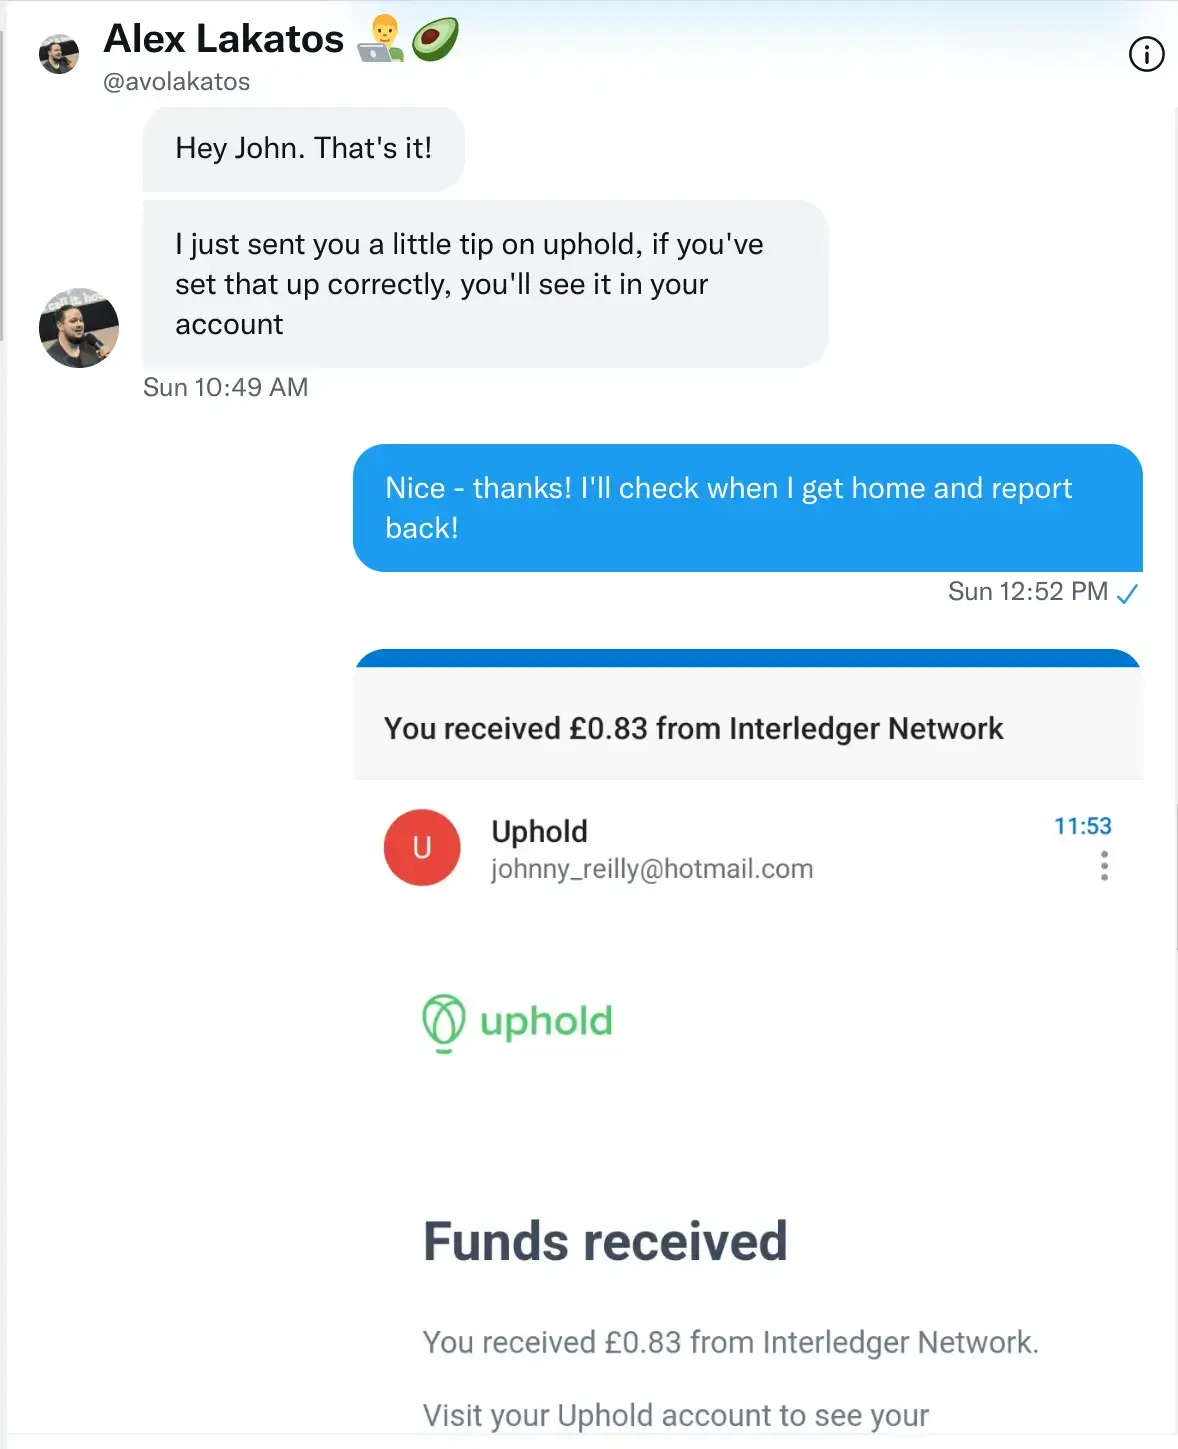 screenshot of conversation with Alex on Twitter, him saying &quot;Hey John. That&#39;s it! I just sent you a little tip on uphold, if you&#39;ve set that up correctly, you&#39;ll see it in your account&quot;